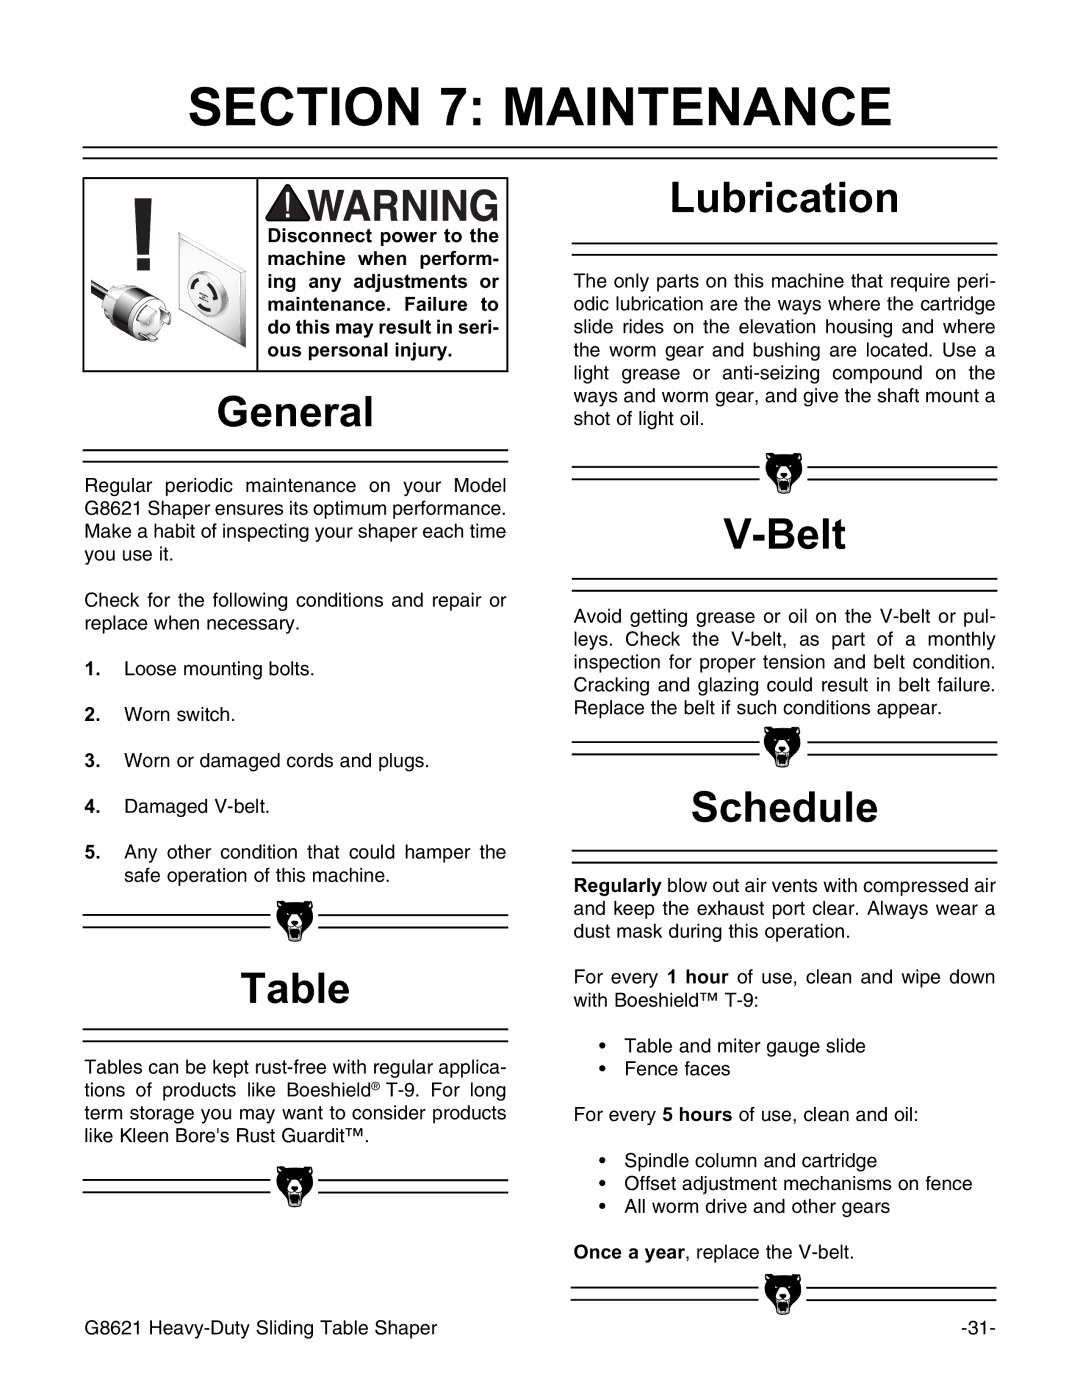 Grizzly G8621 instruction manual Maintenance, General, Lubrication, Belt, Schedule 